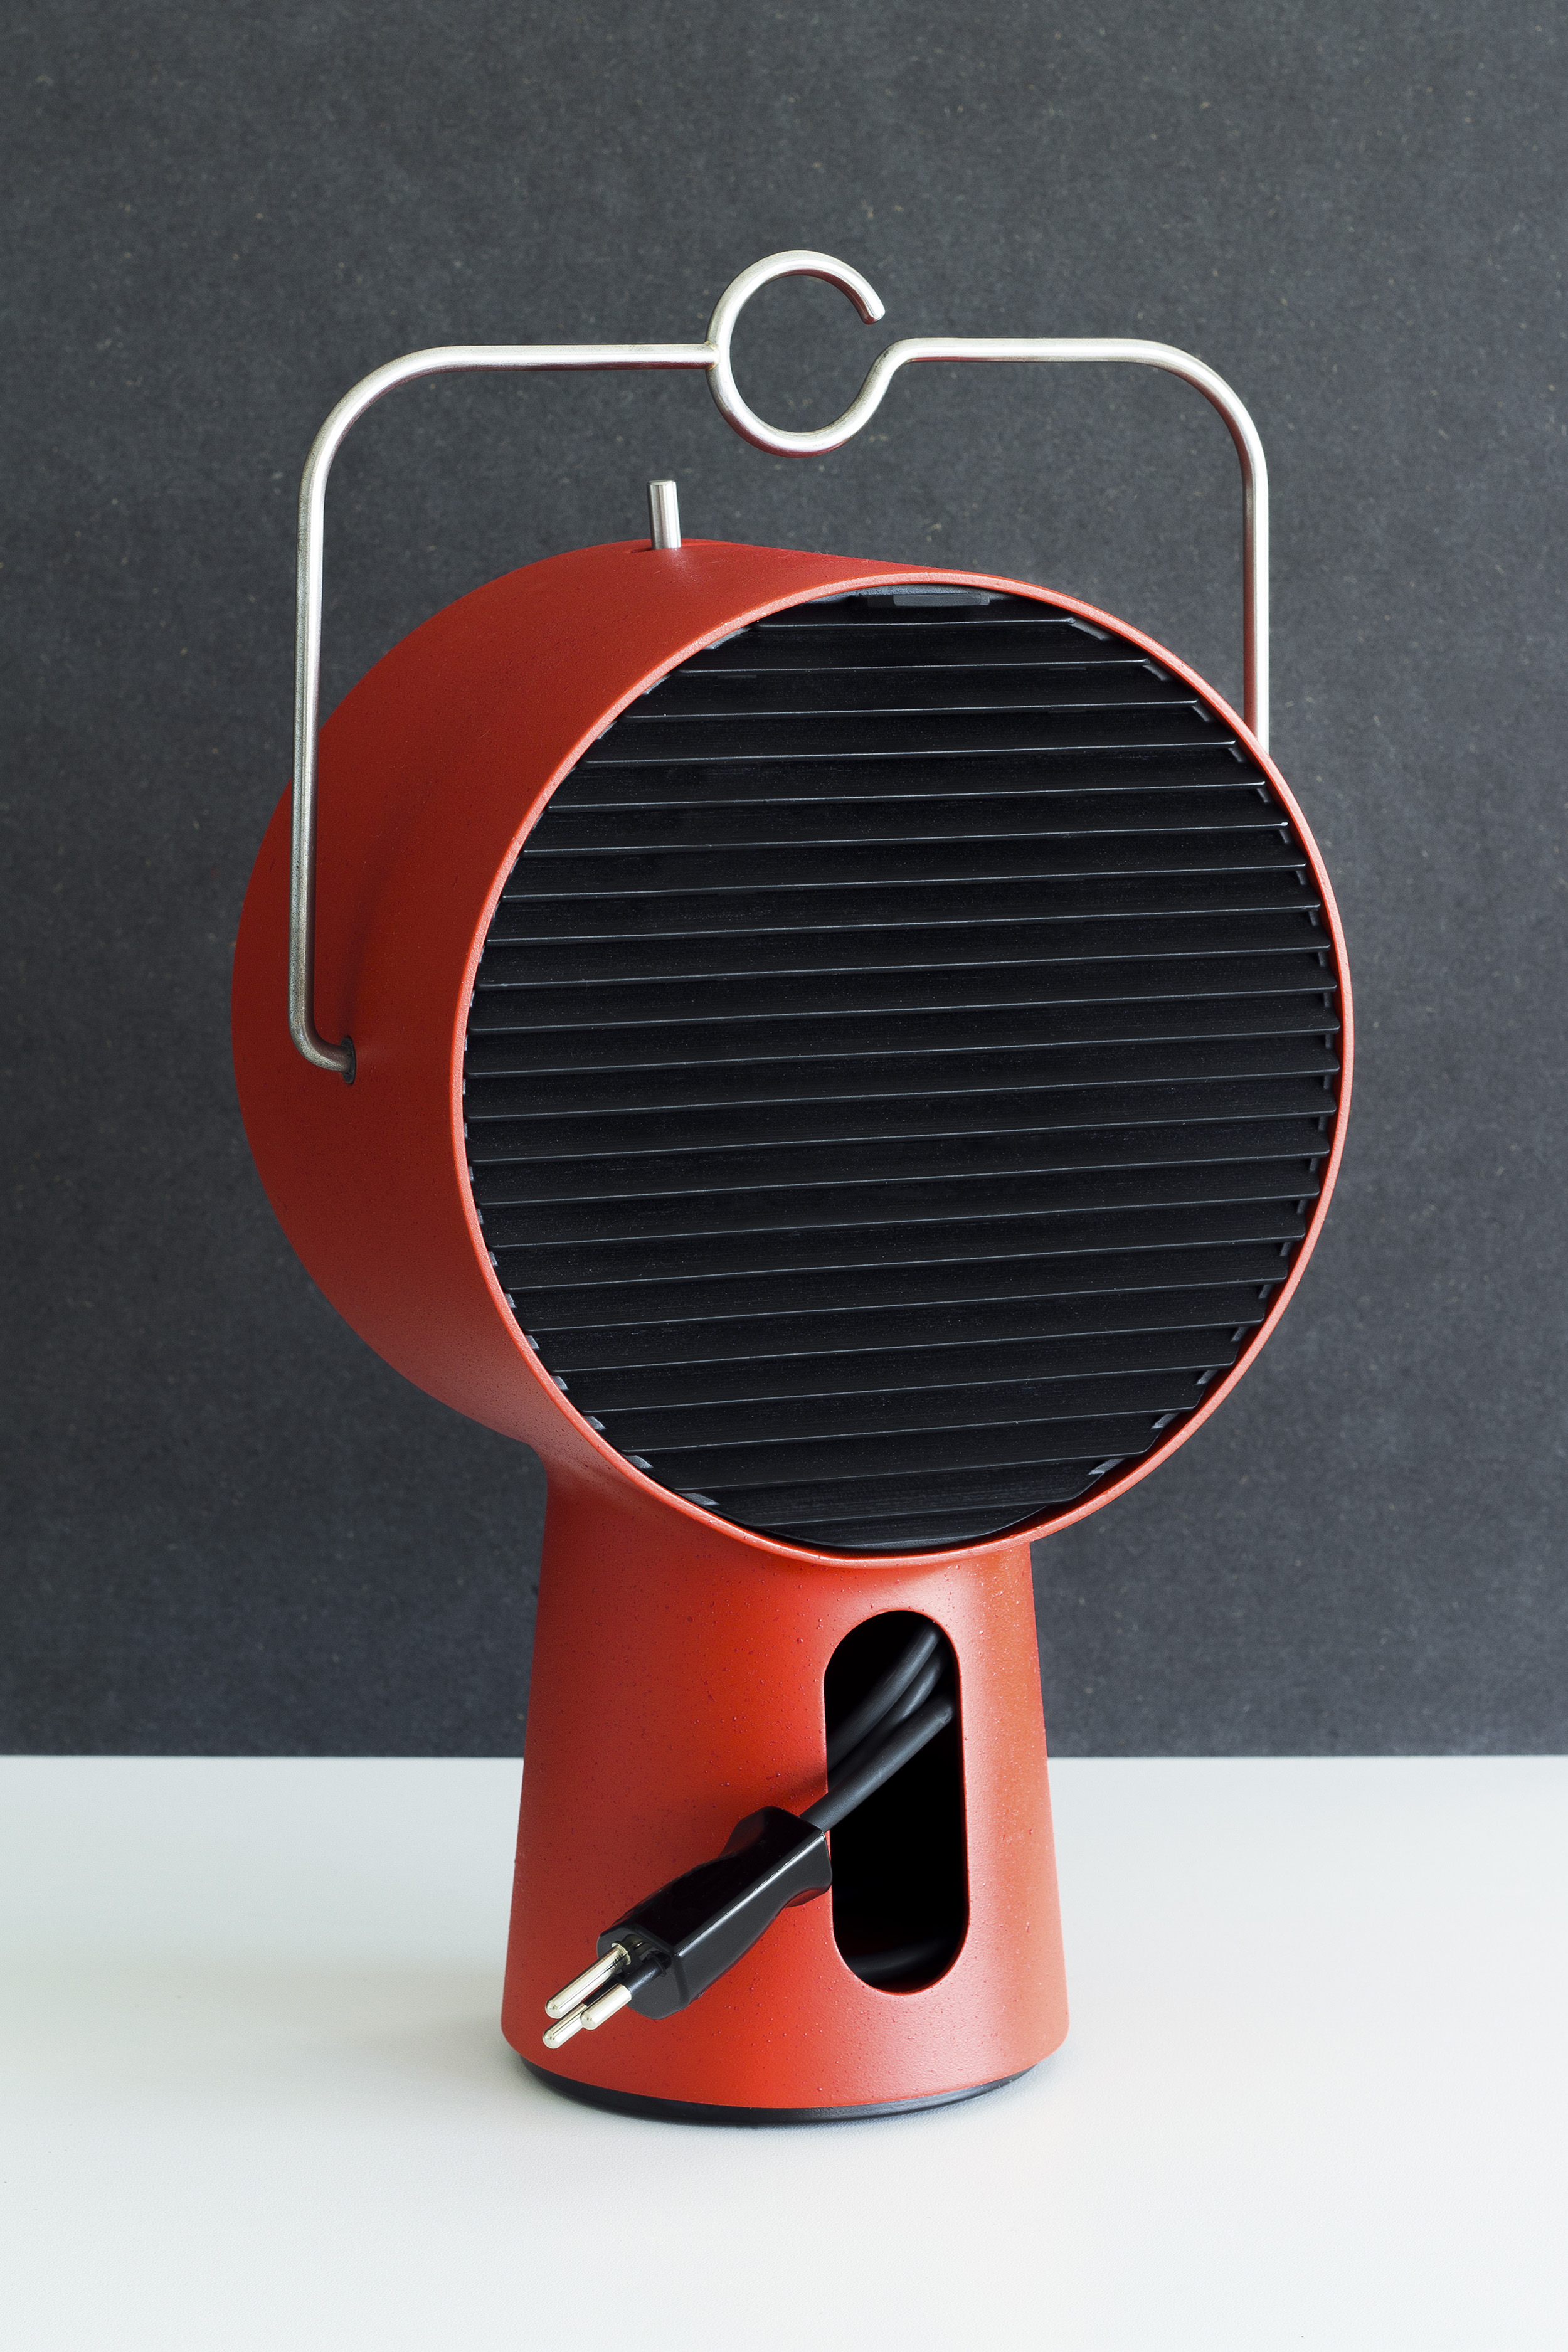 The Portable Kitchen Hood by ECAL/Maxime Augay on Vimeo